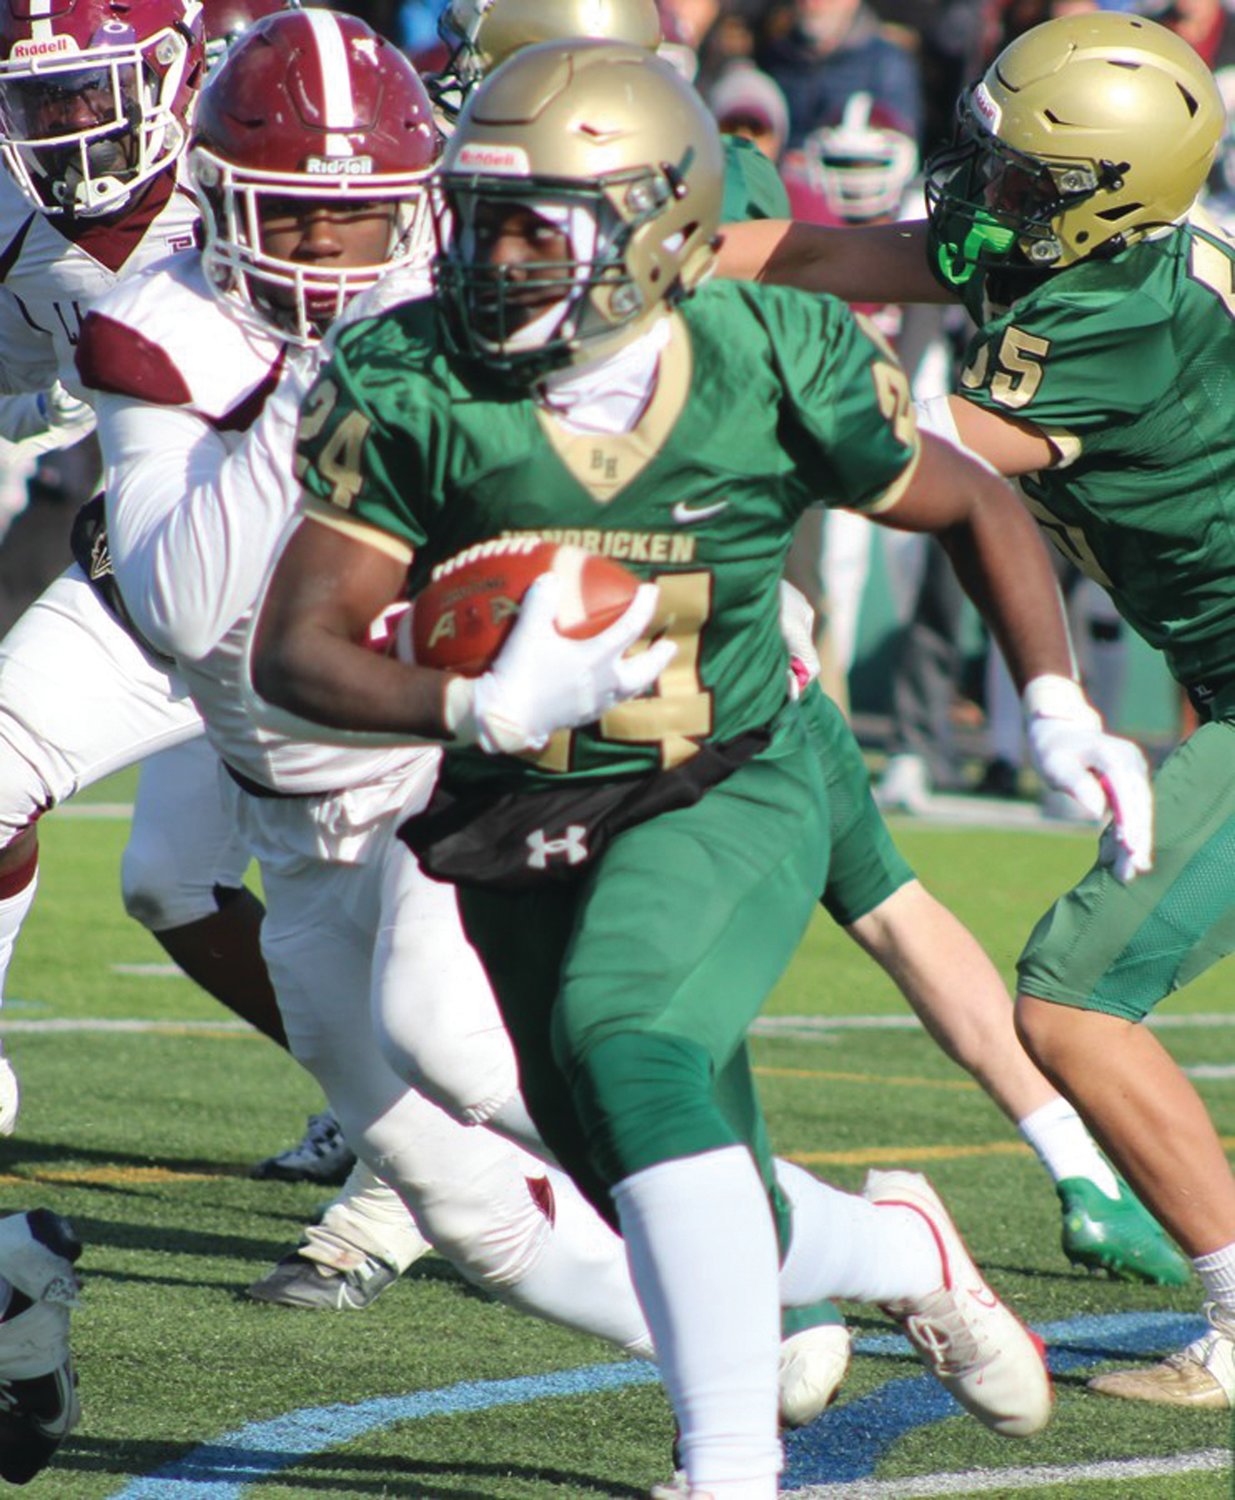 CARRYING THE ROCK: Hendricken running back Ronjai Francis, who scored twice in the championship.